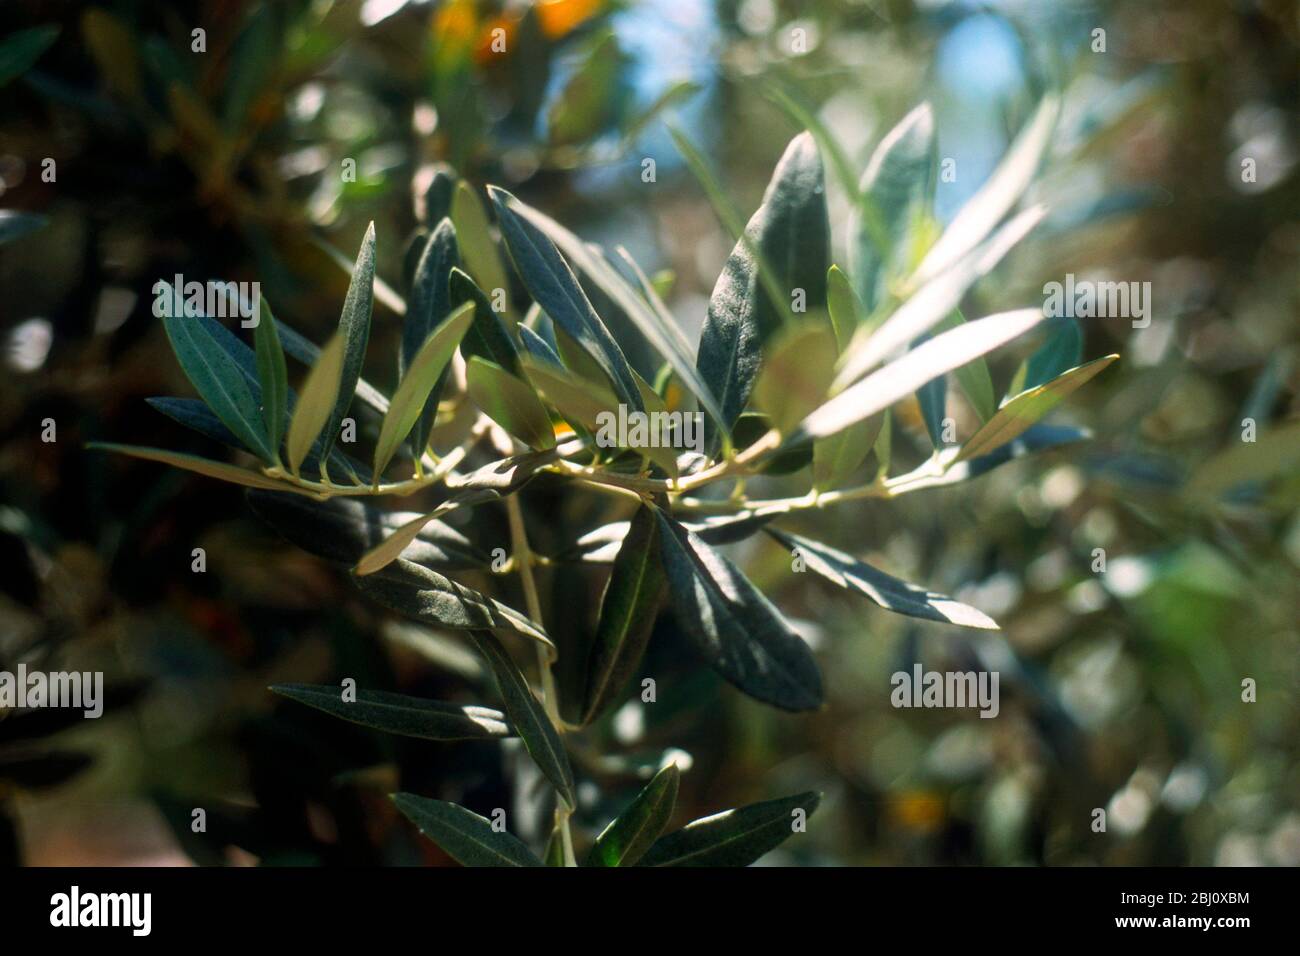 Olive branches on trees at Villa Maiano, Florence Italy - Stock Photo